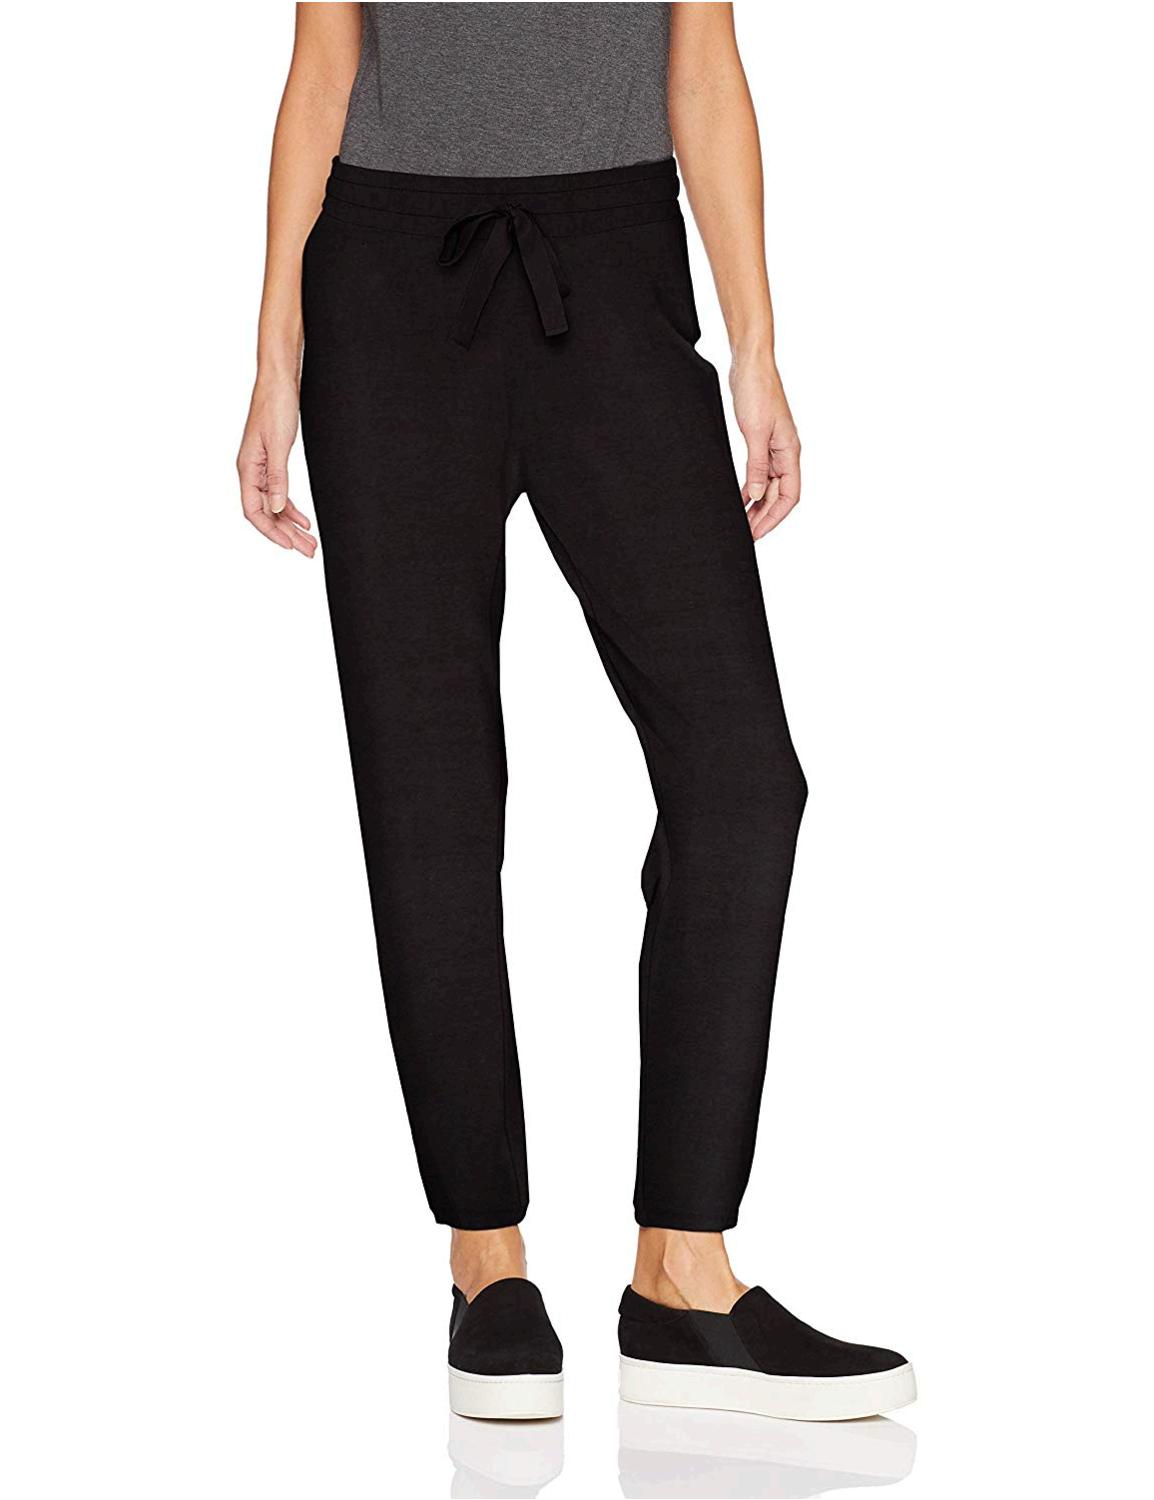 Brand - Daily Ritual Women's Supersoft Terry Rib, Black, Size Large ...